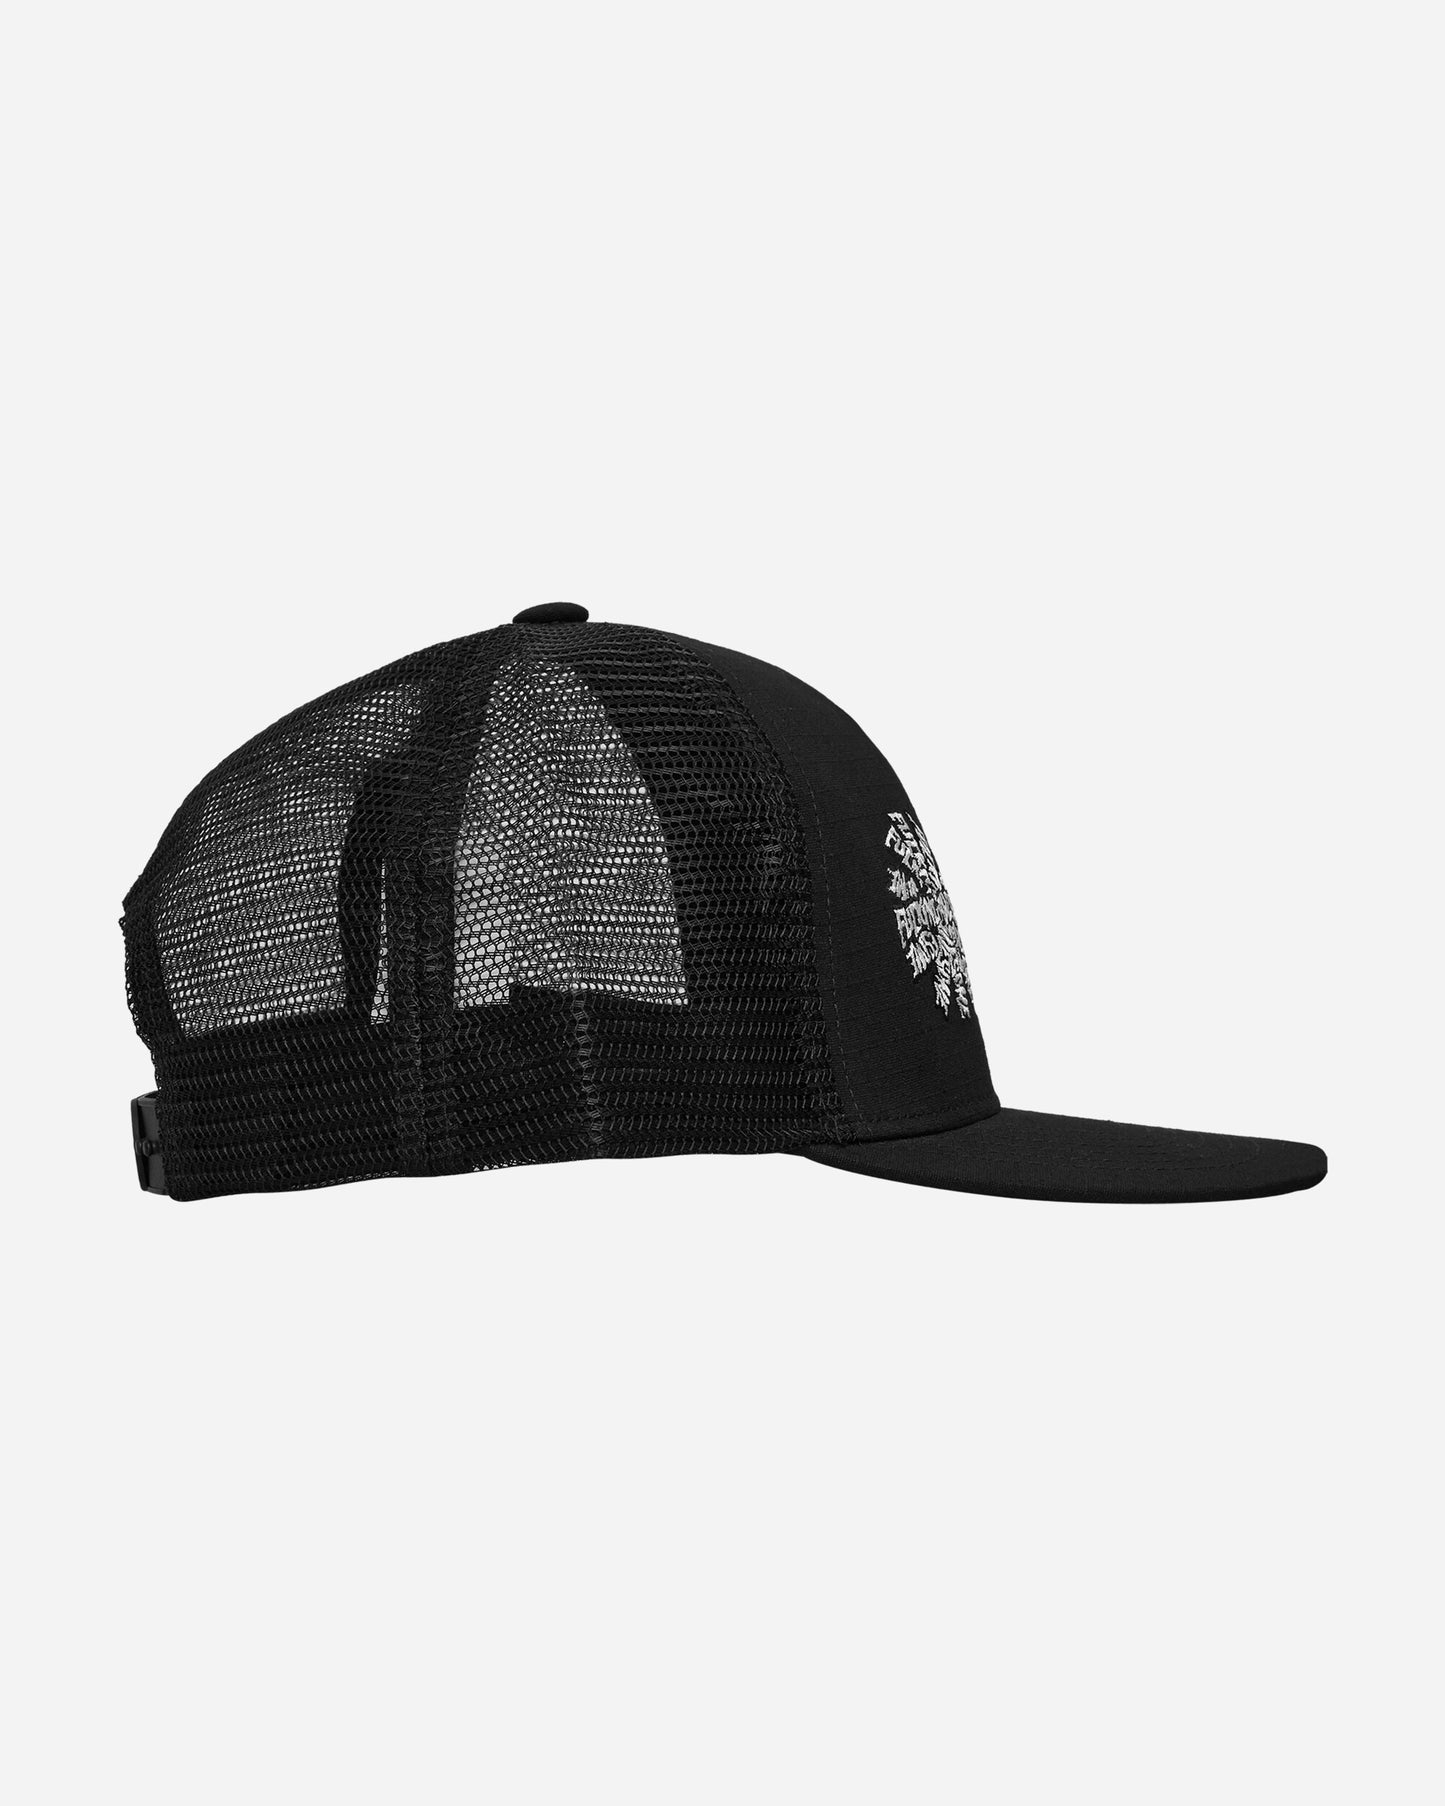 Fucking Awesome Three Sprial Trucker Hat Black Hats Caps PN7669 1